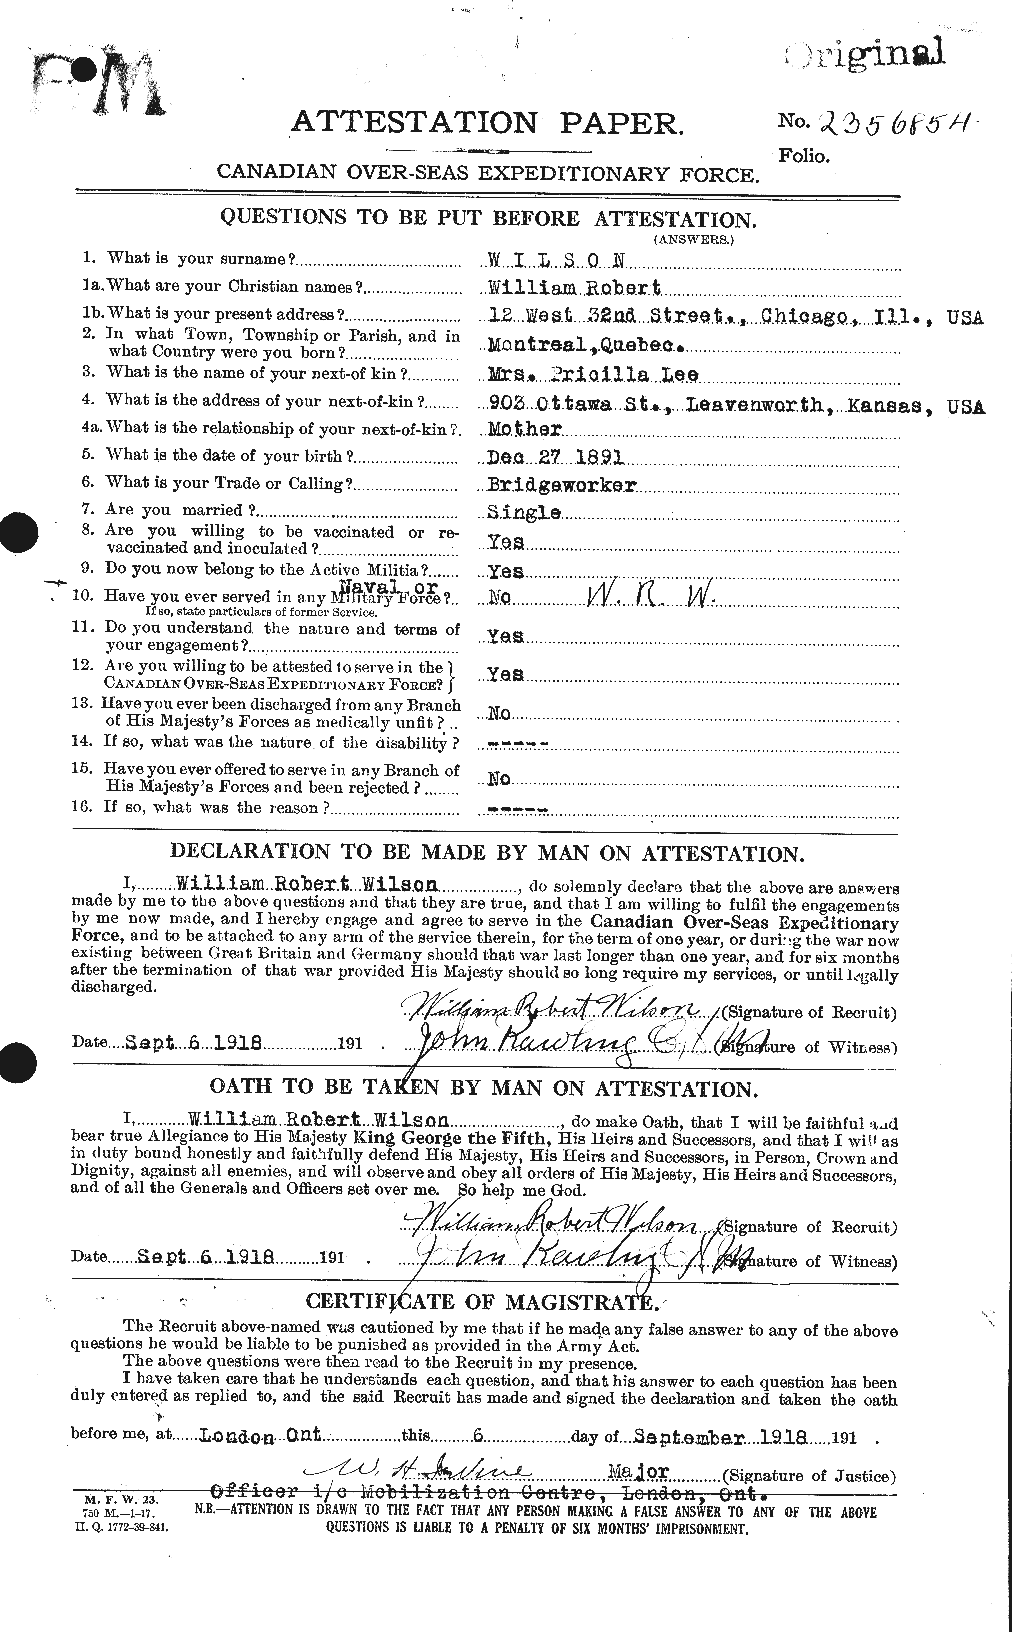 Personnel Records of the First World War - CEF 684094a